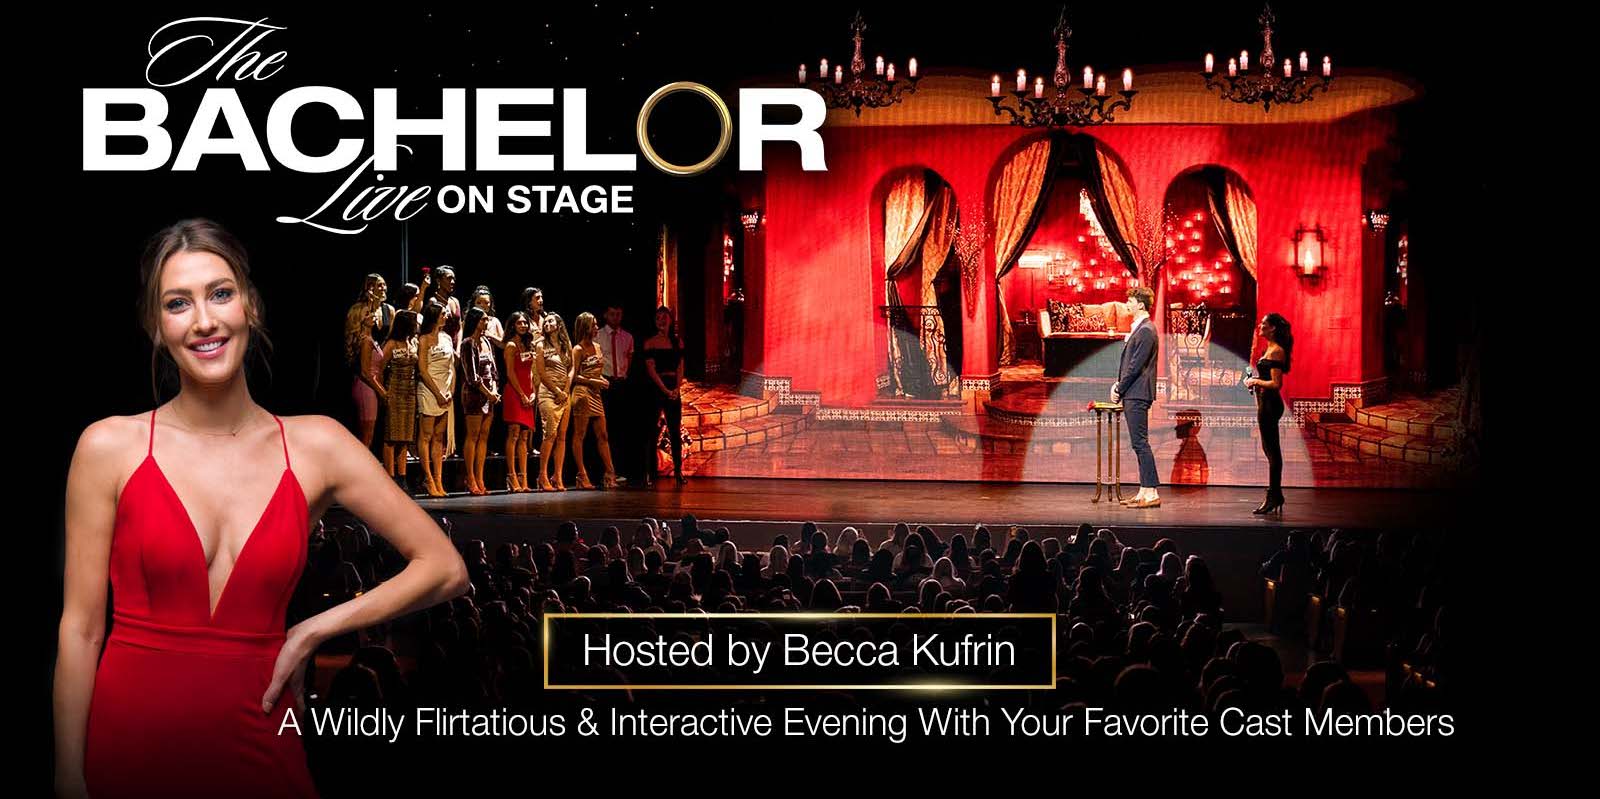 The Bachelor Live on Stage promotional image